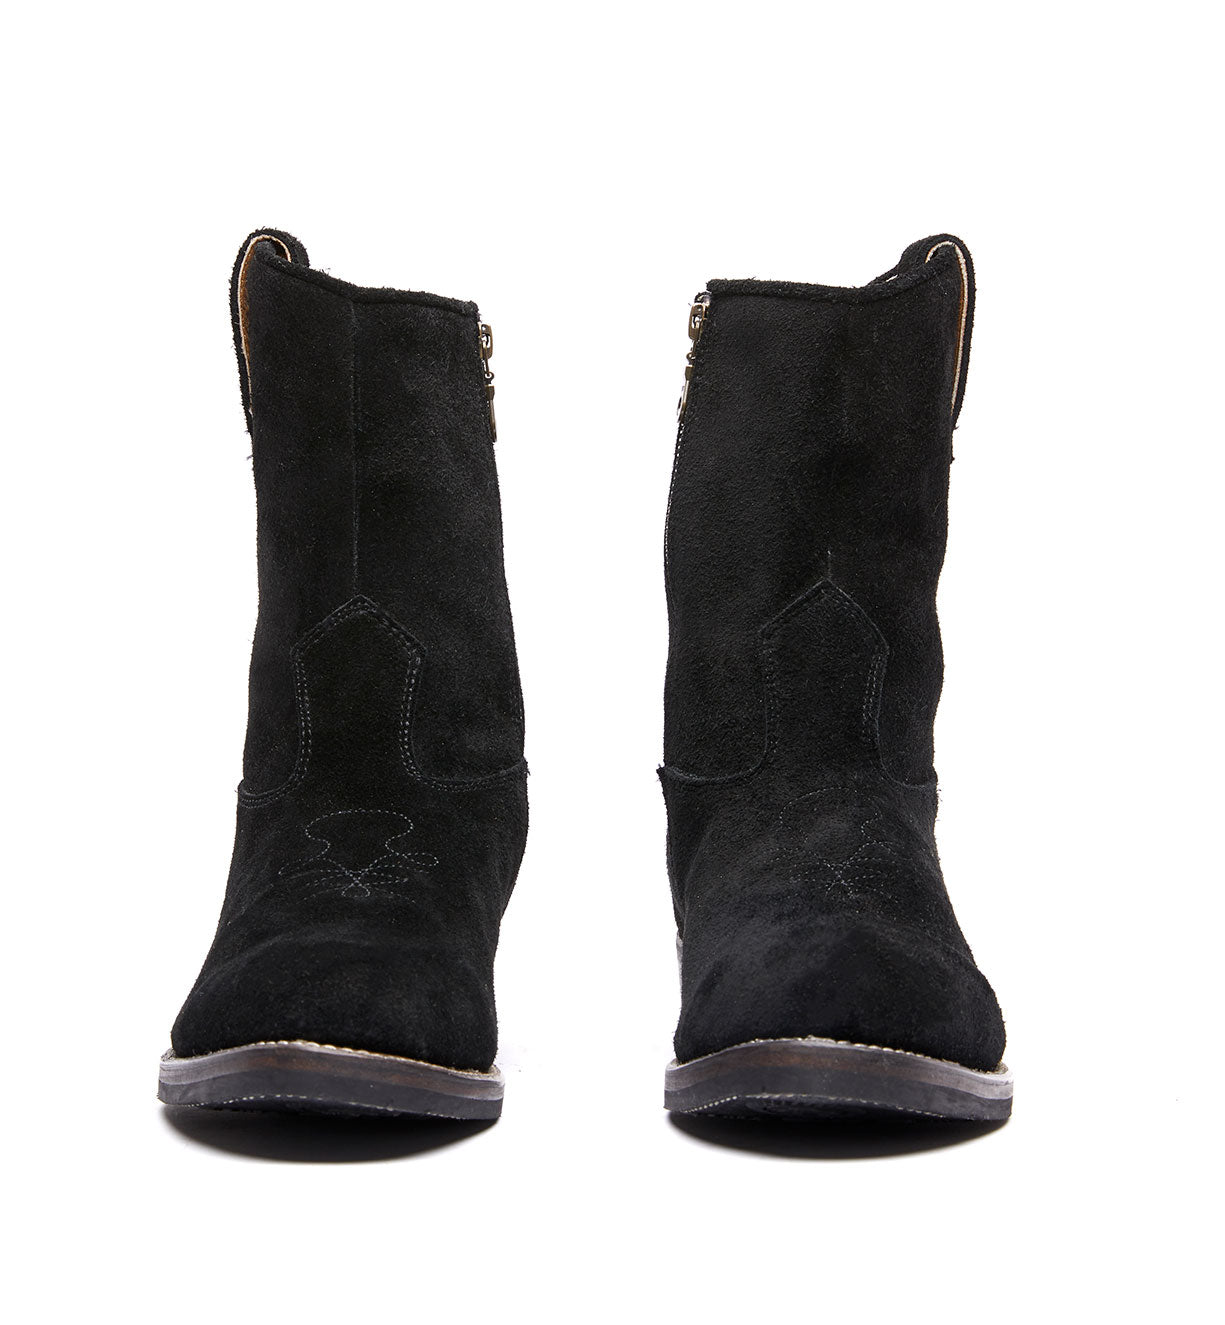 A pair of black Issac Cowboy boots with natural vegetable tanned leather lining on the side by Santa Rosa Brand.